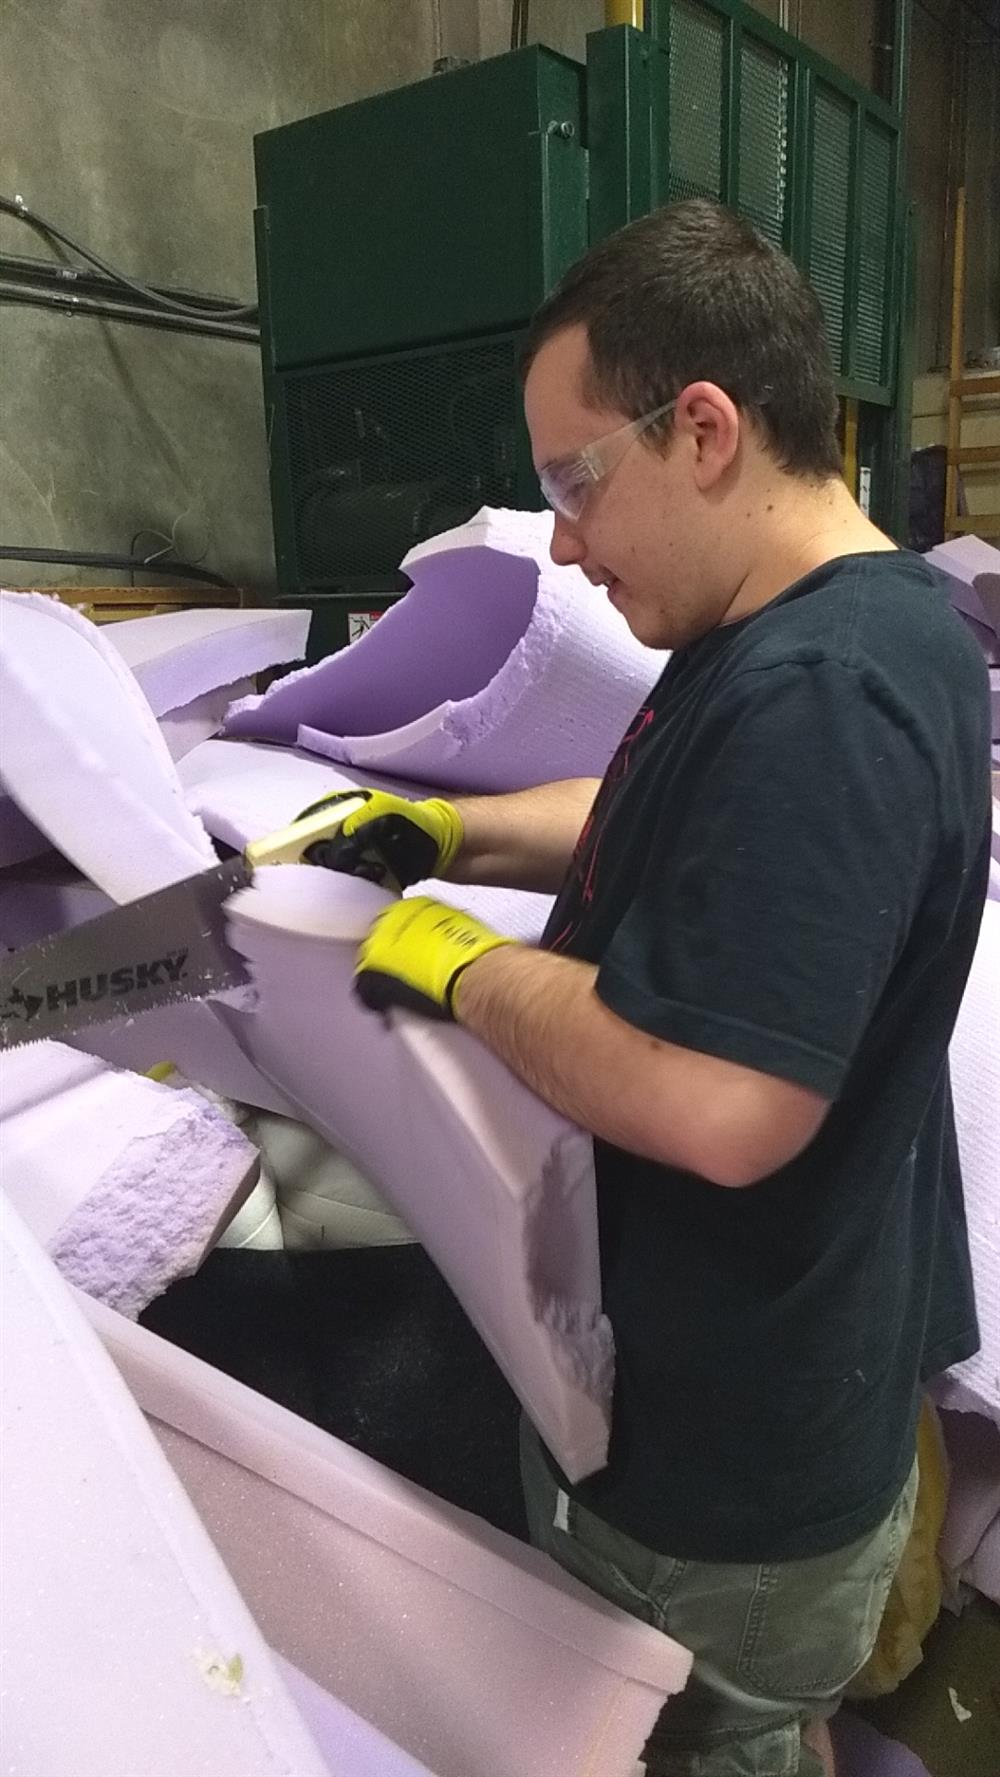 A young man is standing in a costumized position surrounded by many large pieces of purple polystyrene and foam. He is wearing protective glasses and sawing one of the pieces.